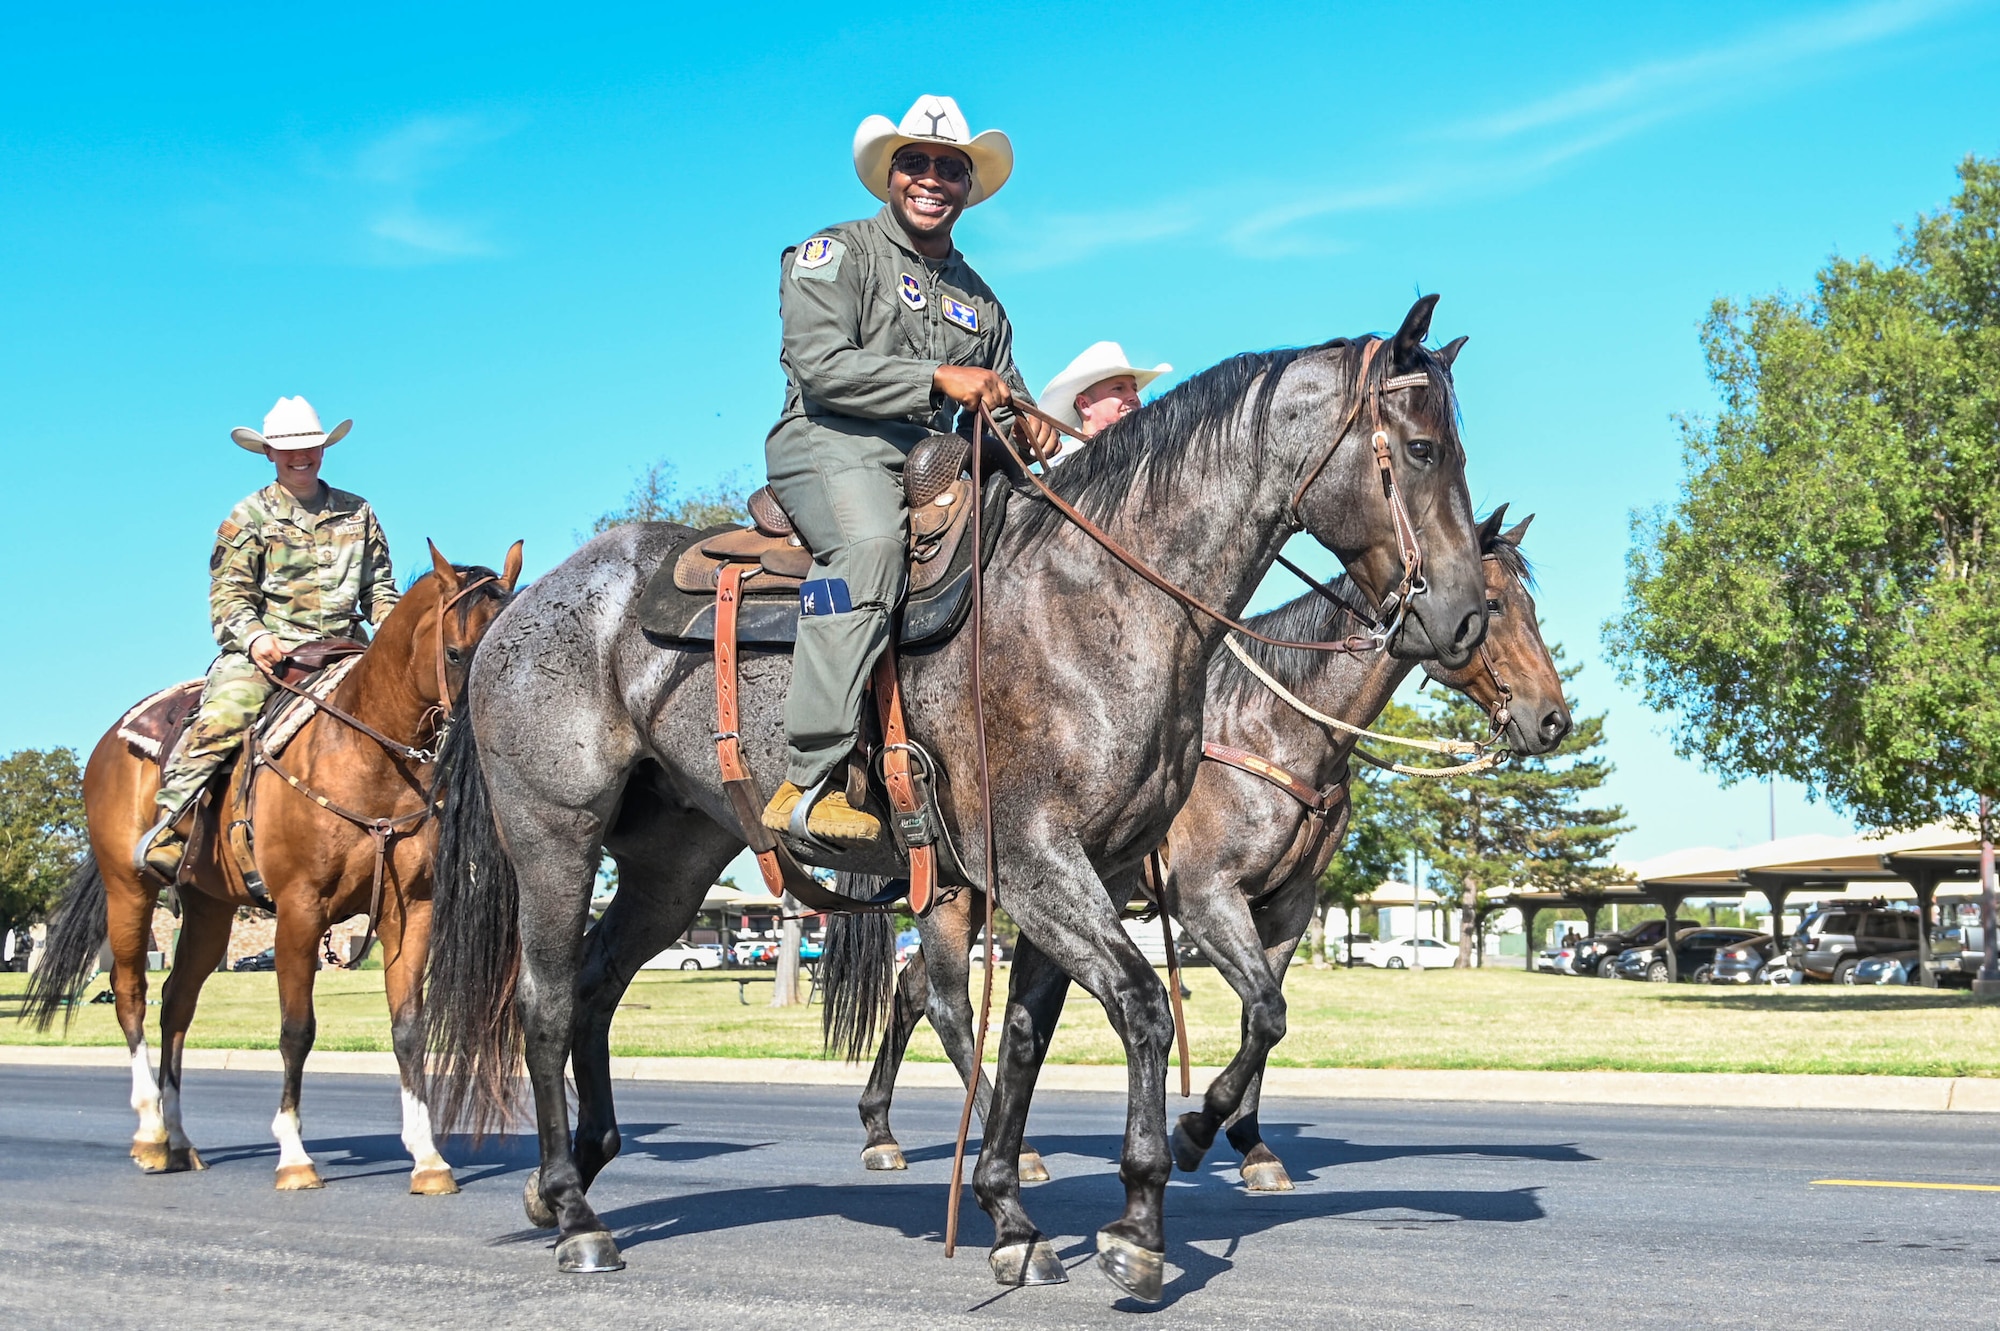 U.S. Air Force Col. Patrick Brady-Lee, 97th Air Mobility Wing deputy commander, rides a horse during the 25th Annual Cattle Drive at Altus Air Force Base, Oklahoma, Aug. 24, 2023. Brady-Lee helped guide the cattle around the base as part of the annual tradition. (U.S. Air Force photo by Airman 1st Class Heidi Bucins)